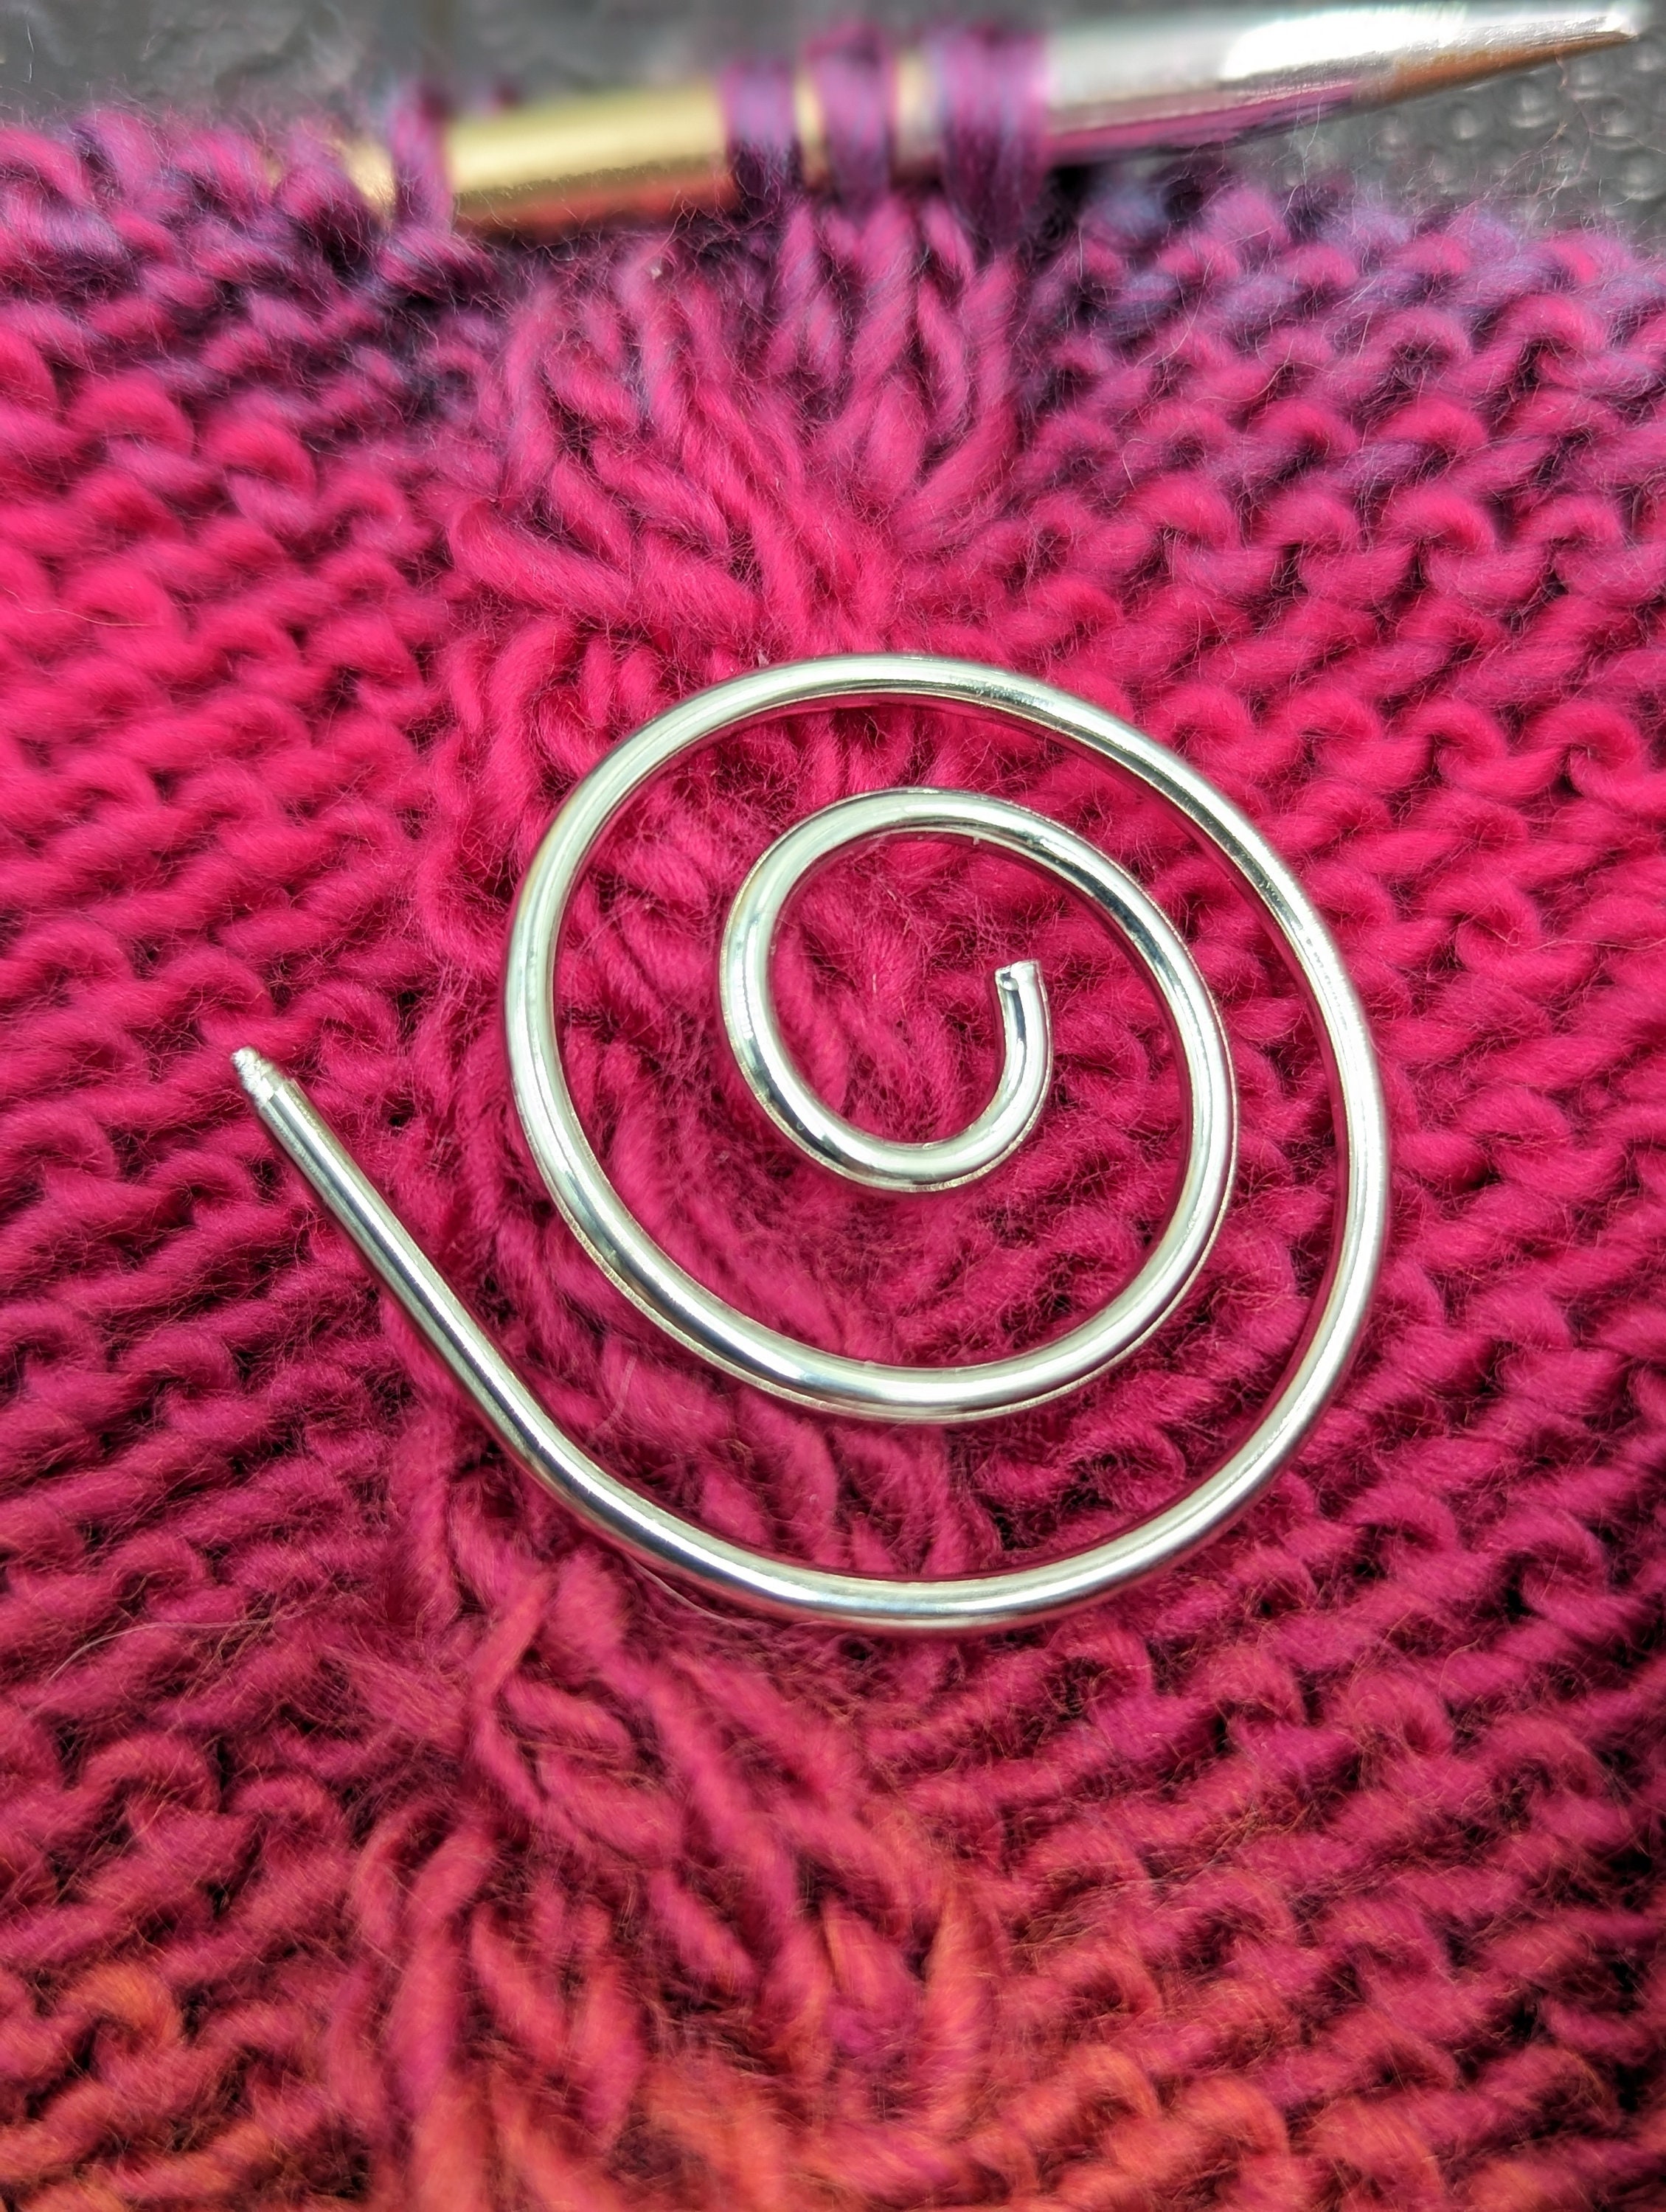 Spiral Knit Pin, Stitch Keeper, Arthritis Ring, Crochet Gift, Knitting Gifts,  Yarn Guide, Stitch Keeper, Gifts for Her, Christmas Gift Ideas 